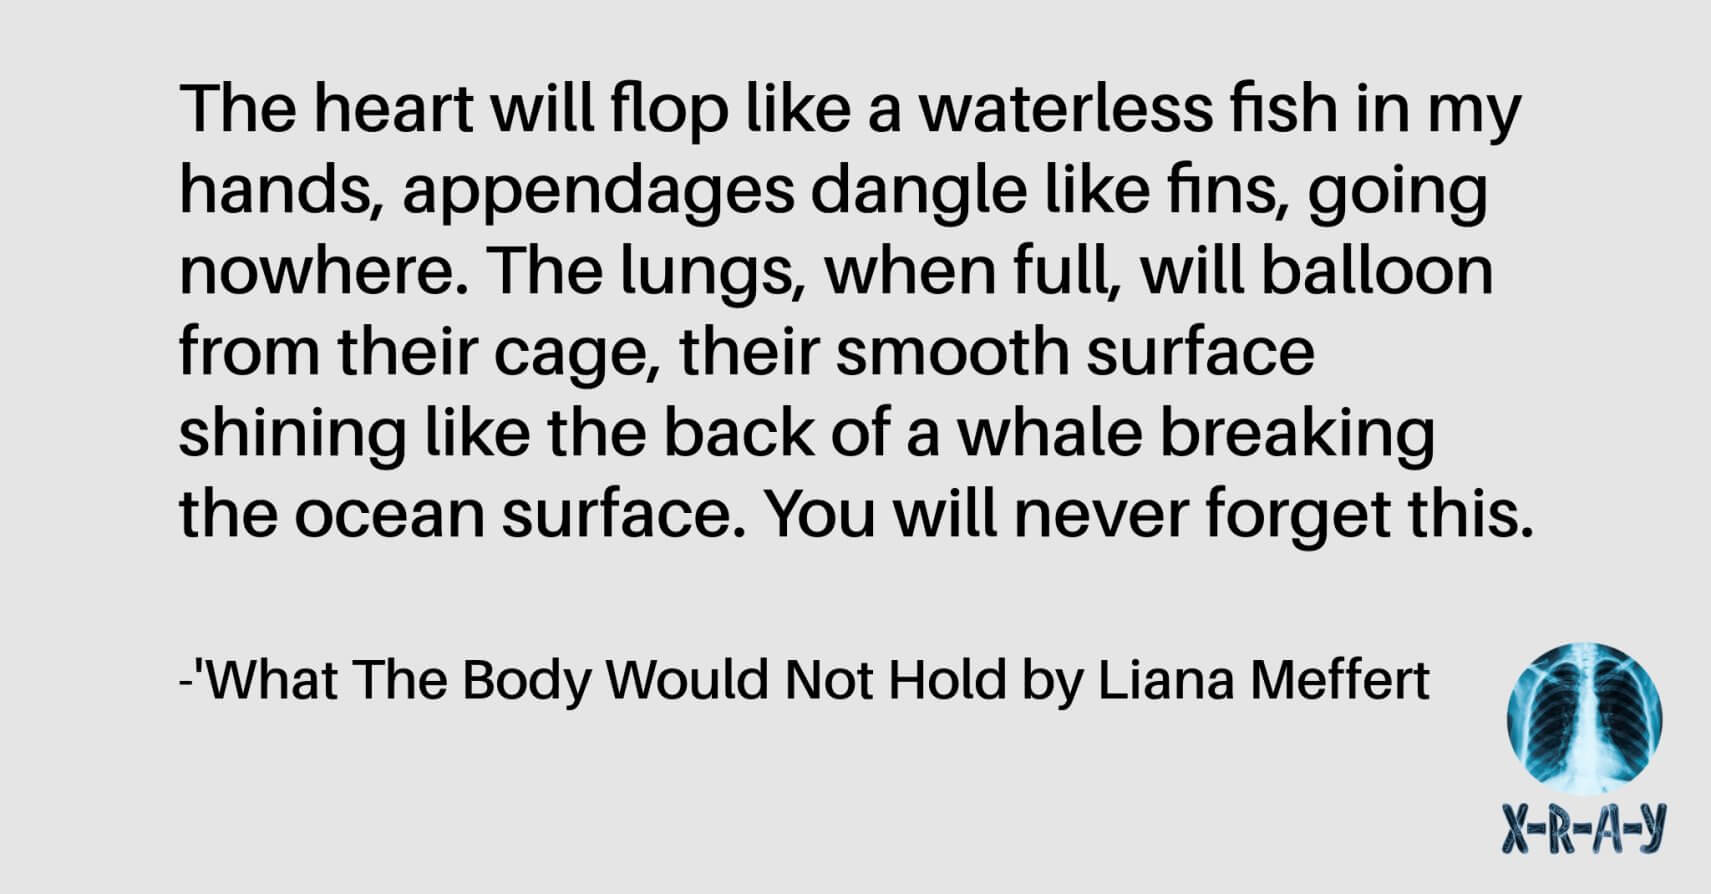 WHAT THE BODY WOULD NOT HOLD by Liana Meffert